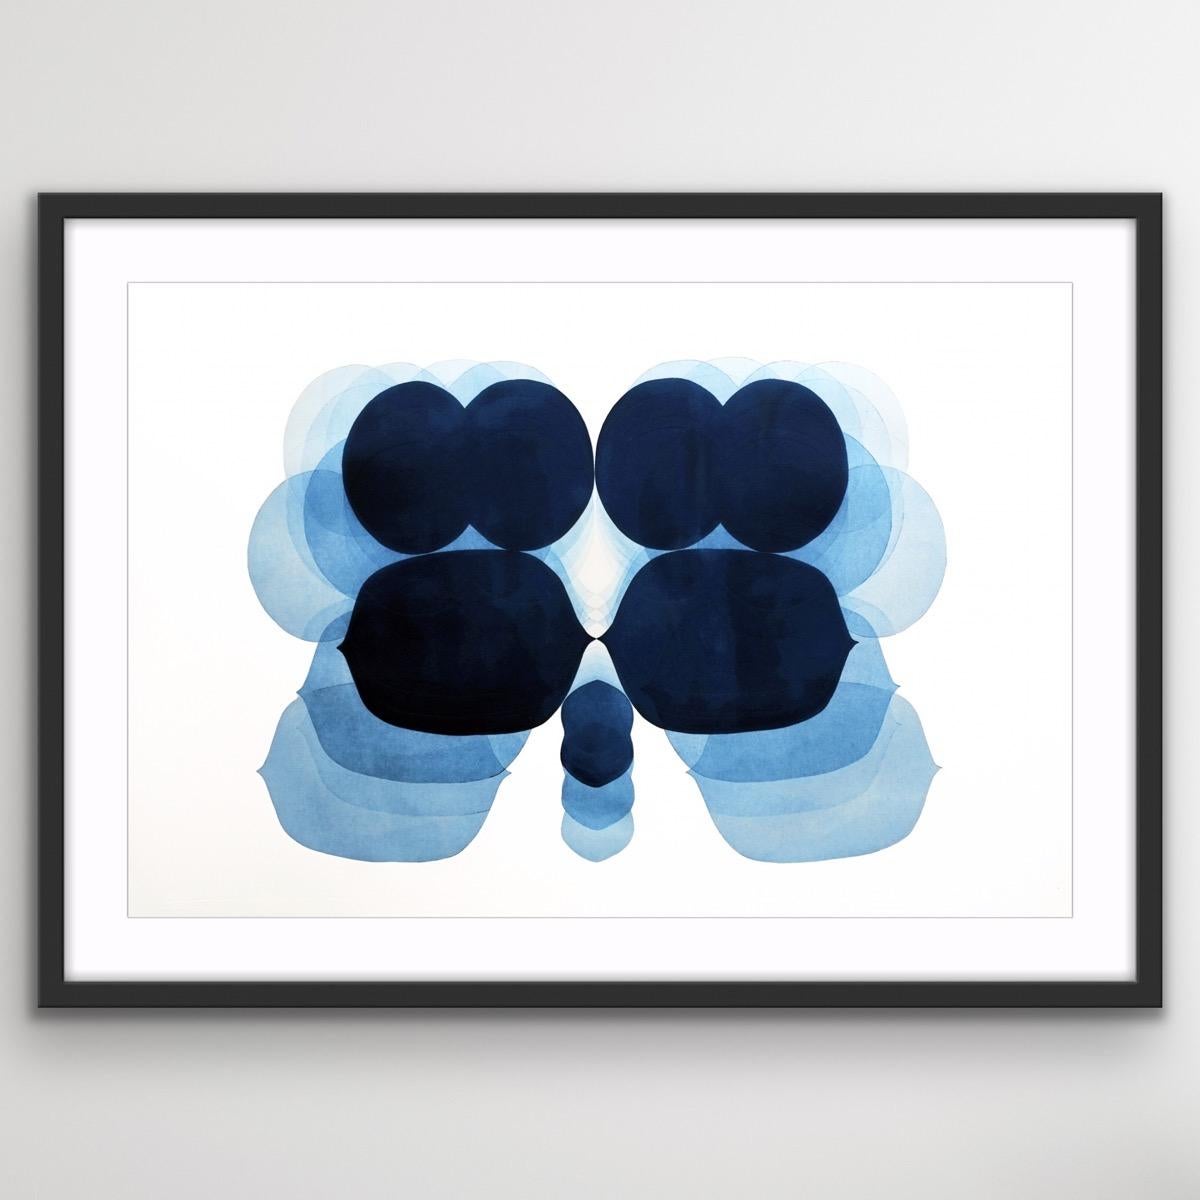 NV10, Abstract Minimalist Painting, Blue and White Art, Large Contemporary Art - Black Interior Print by Jonathan Moss